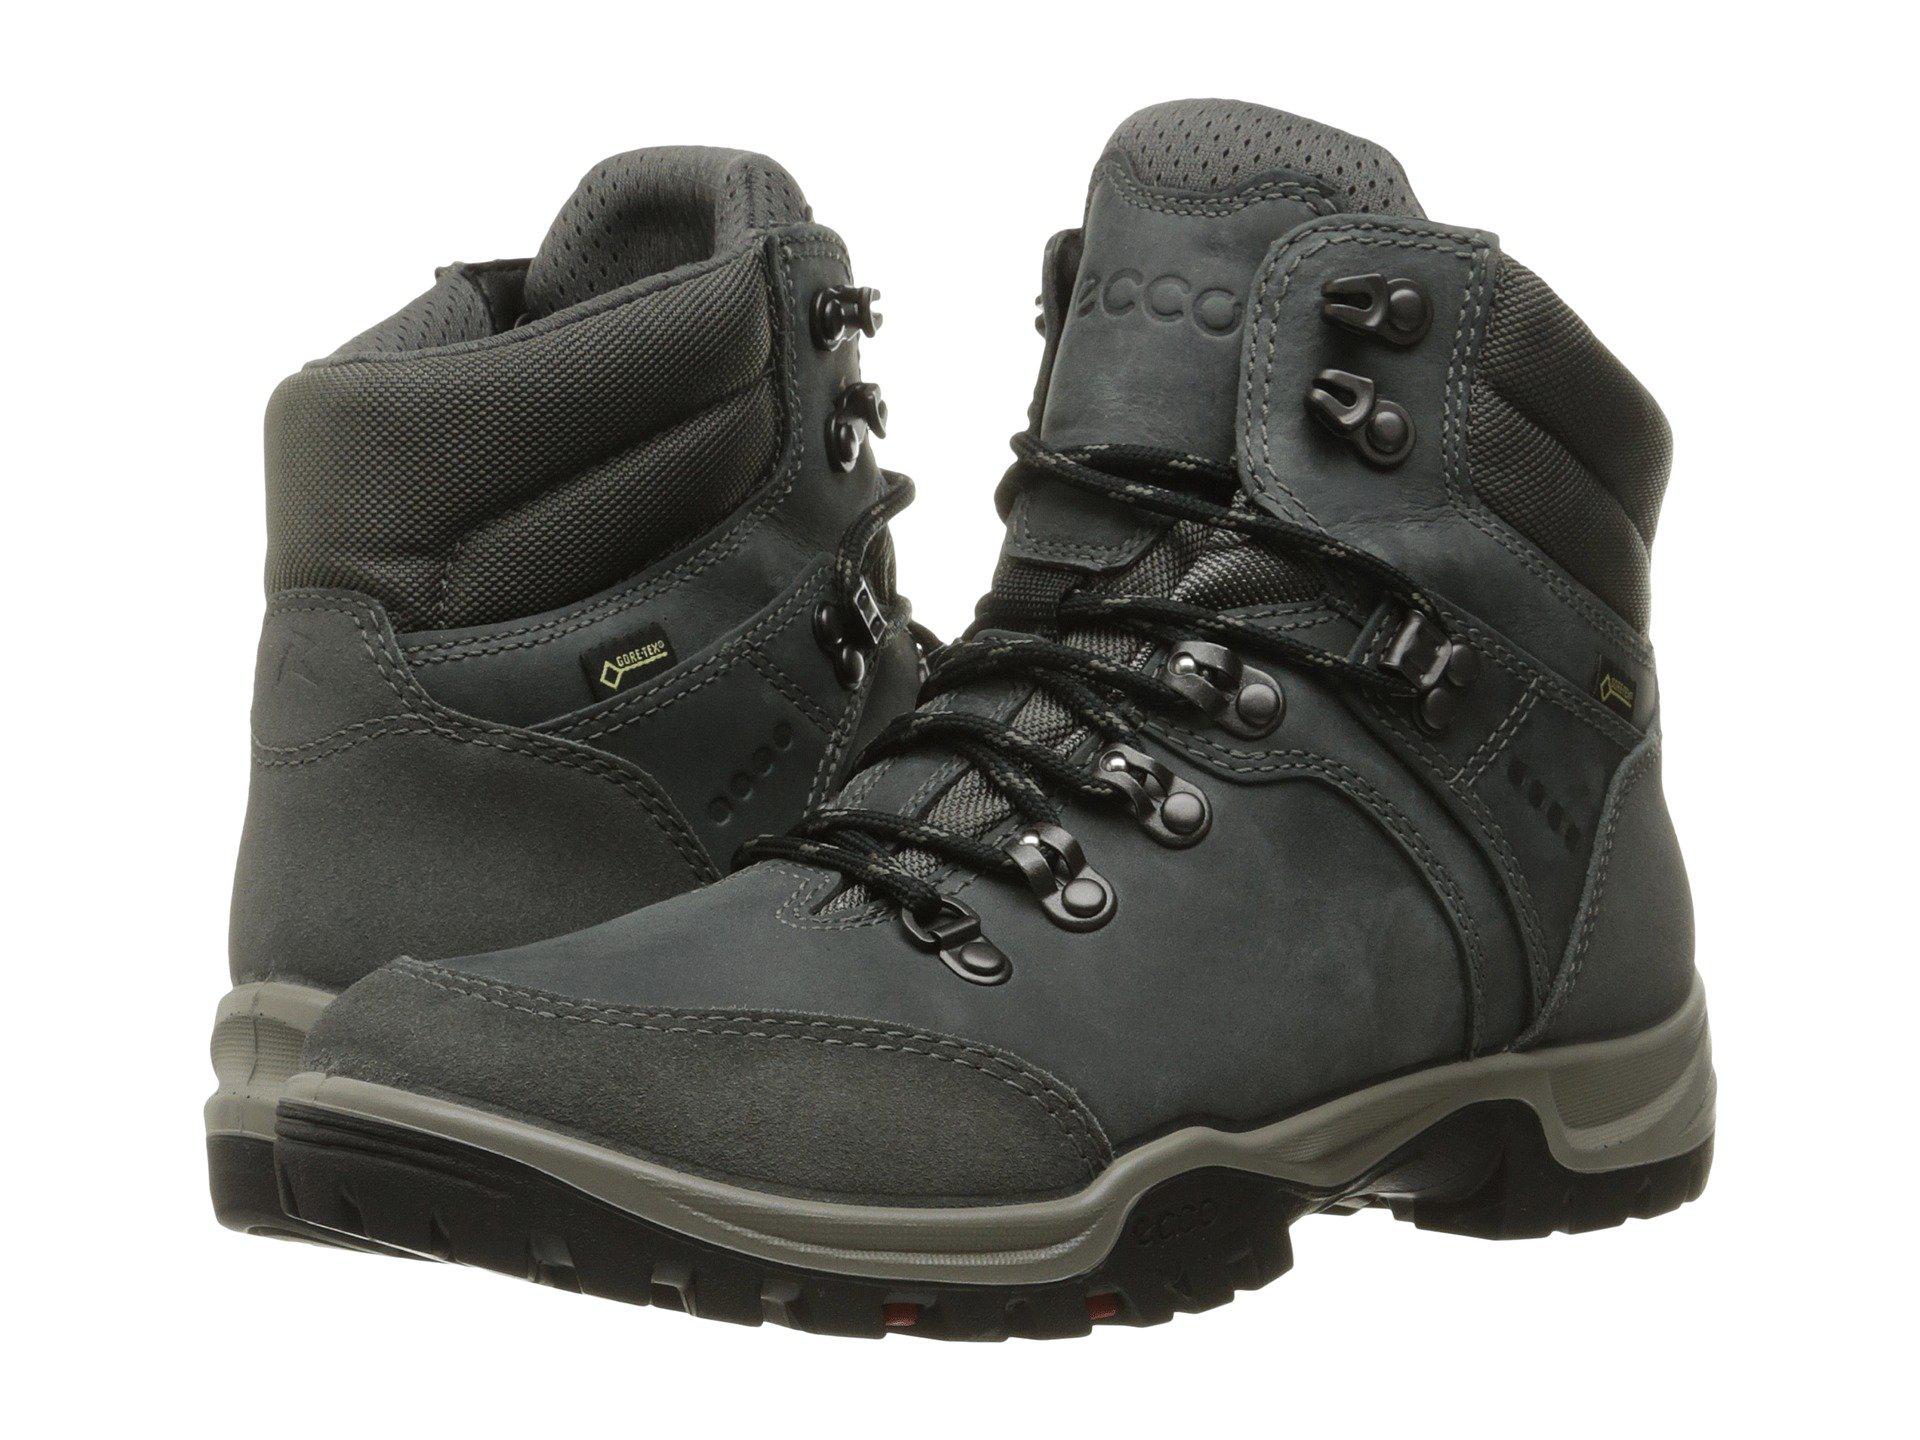 Ecco Leather Xpedition Iii Gtx (coffee) Women's Hiking Boots - Lyst